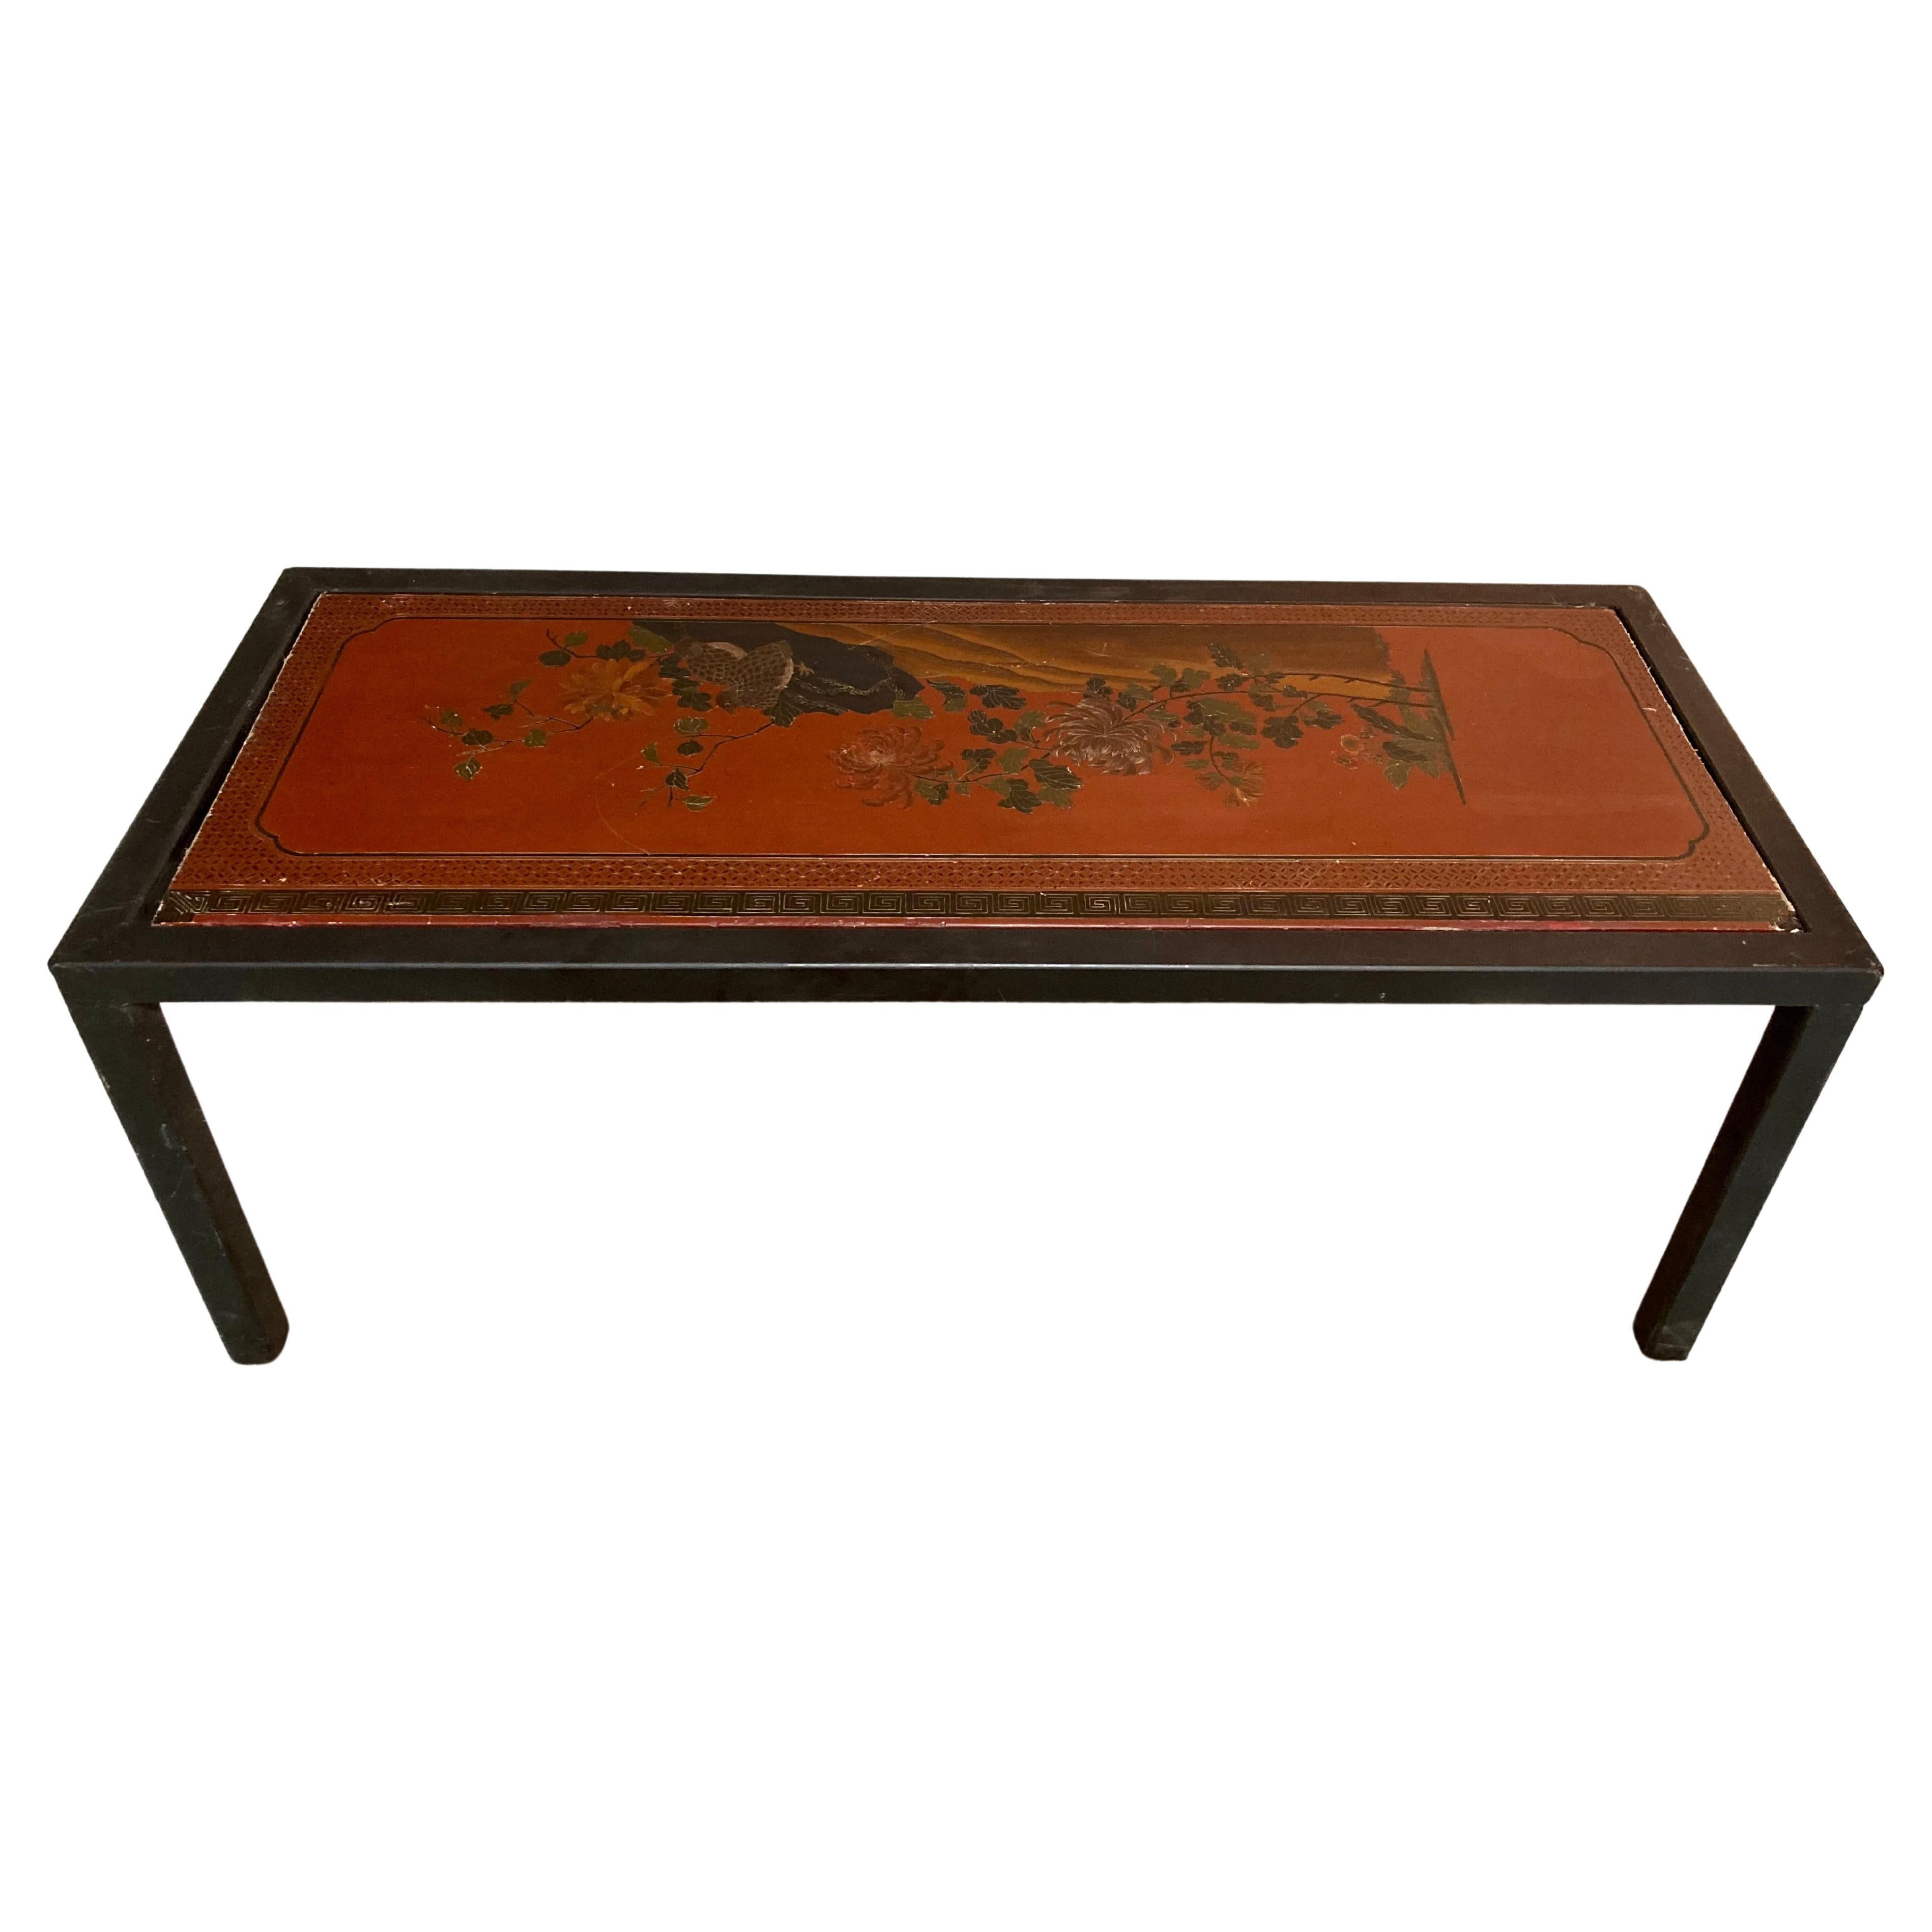 Tony Duquette Custom Coffee Table With Inset Chinese Panel